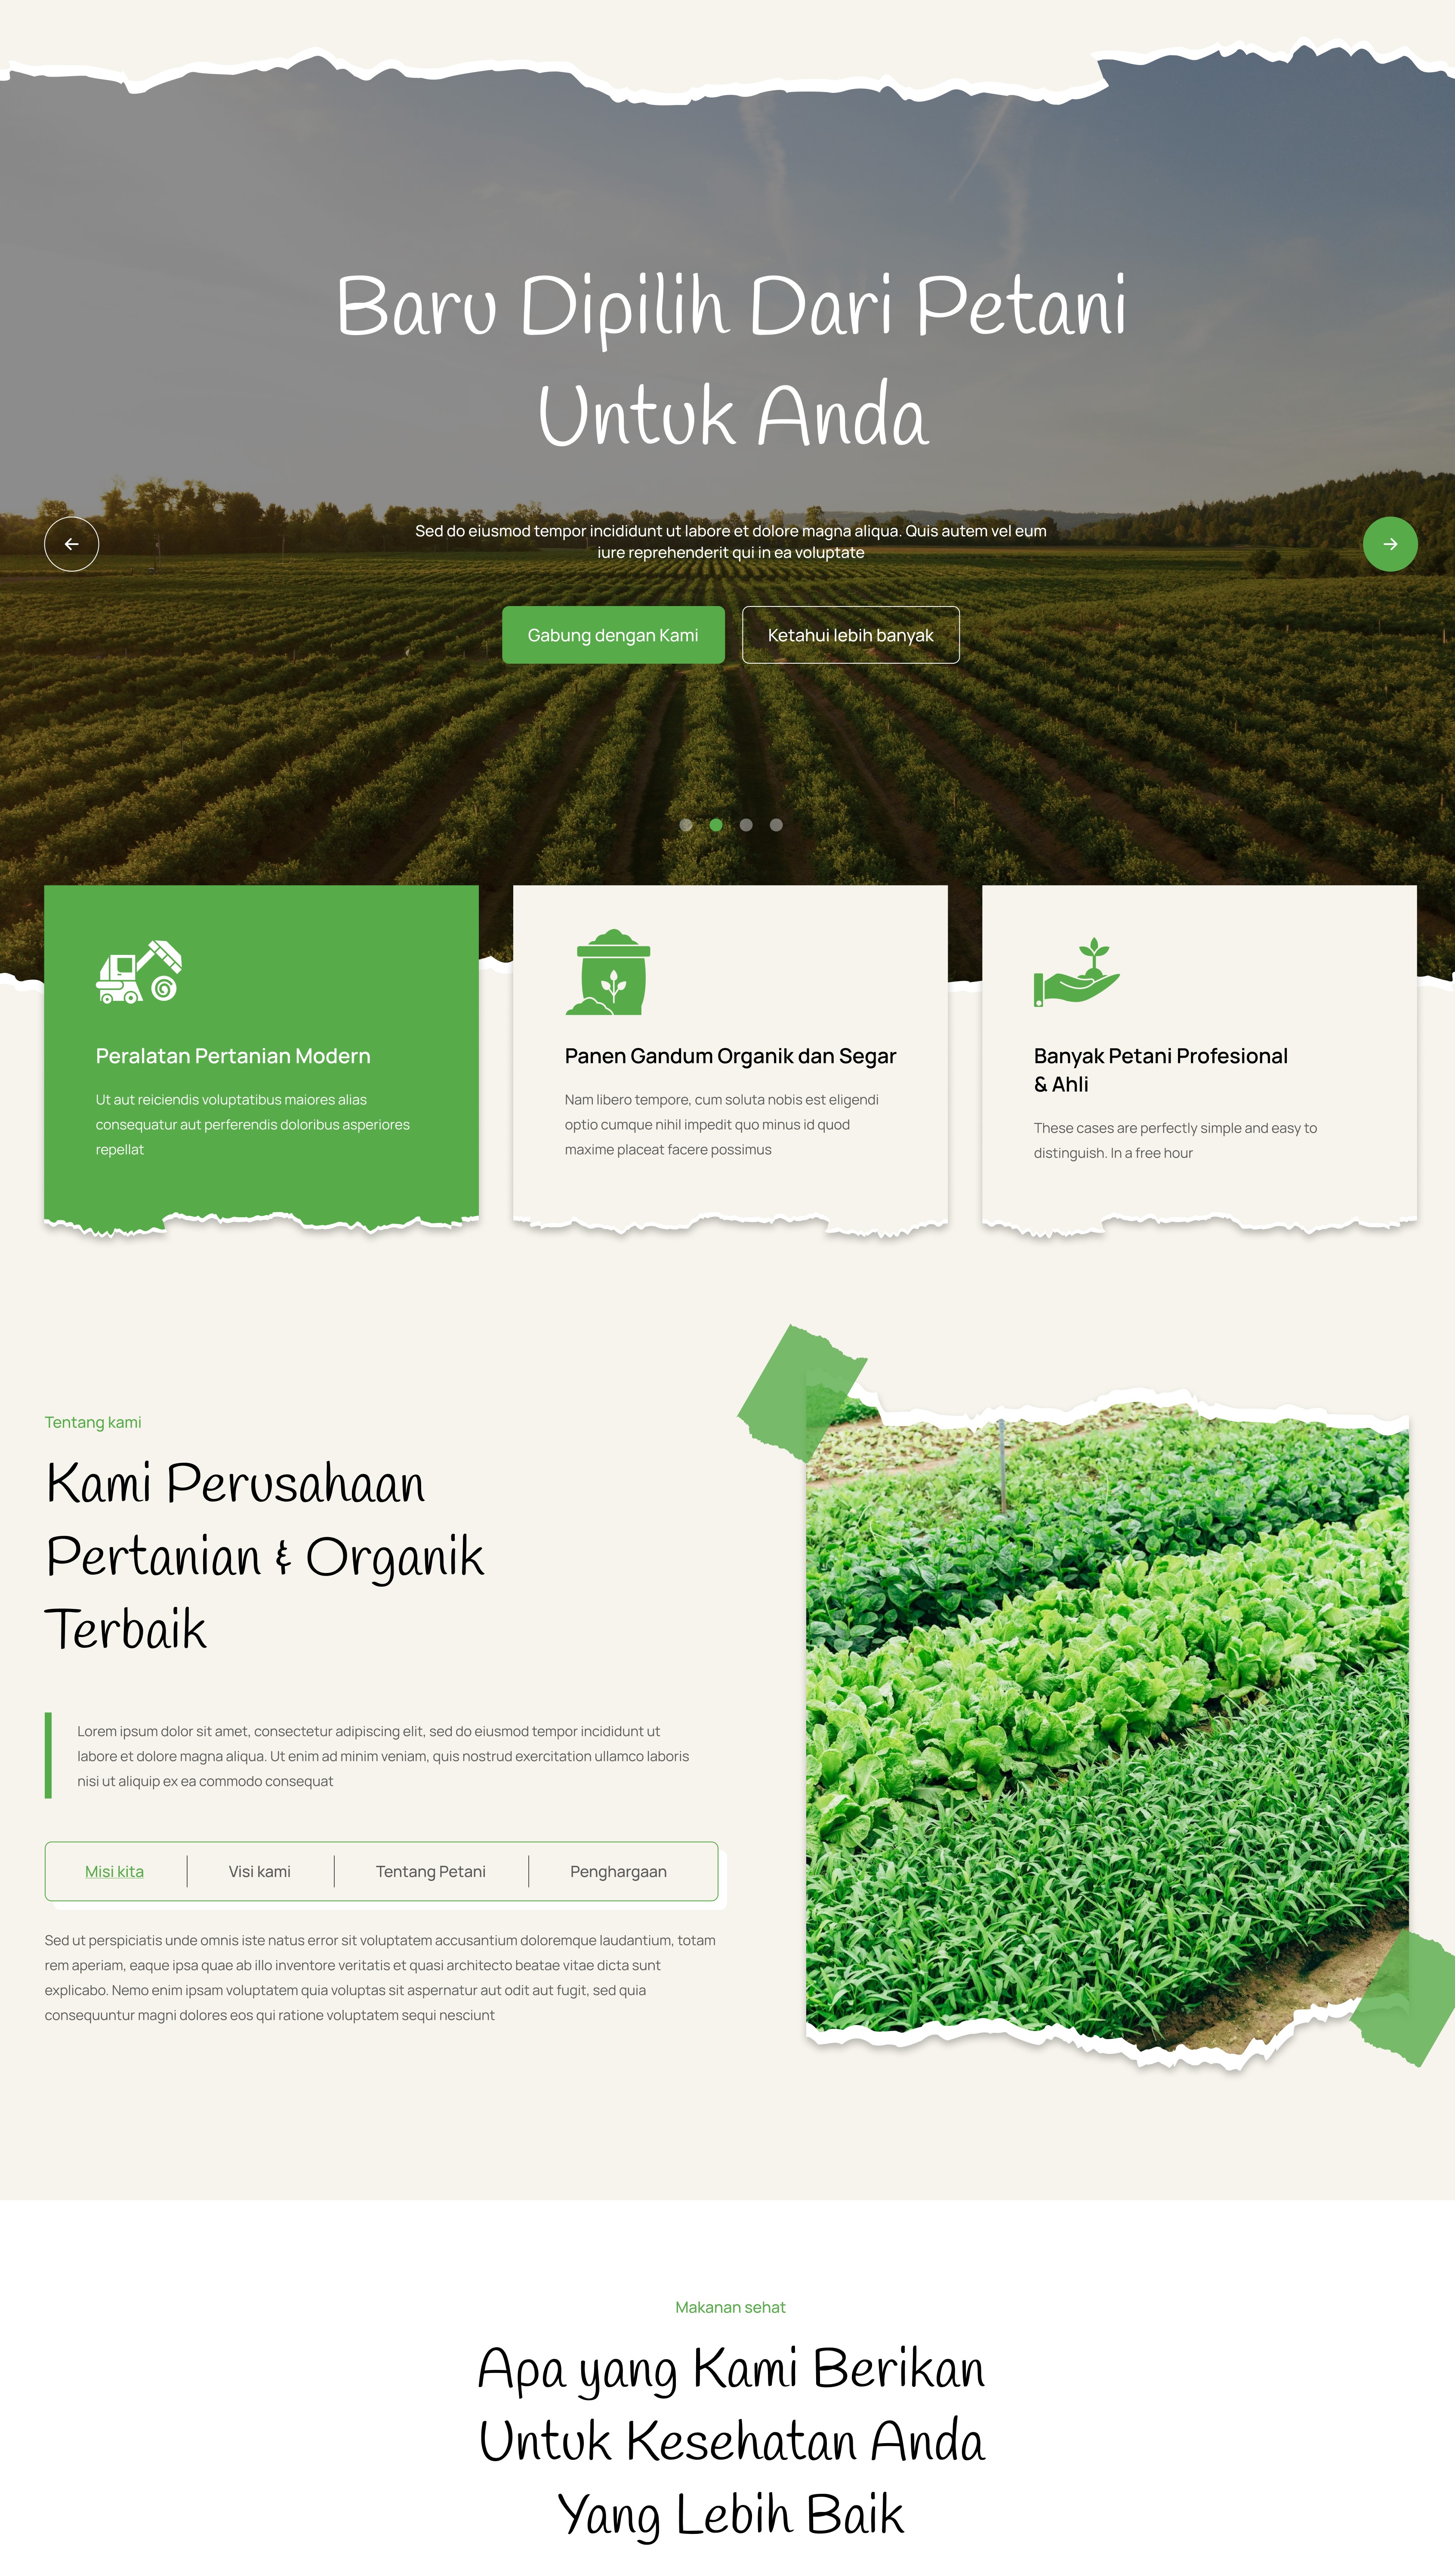 Agricultur Farming:Agricultur Farming is an engaging landing page dedicated to sustainable and modern agricultural practices. The page promotes agricultural technologies, crop management solutions, and farm consultancy services. Visitors are inspired to embrace innovative farming methods and optimize their agricultural productivity with Agricultur Farming.